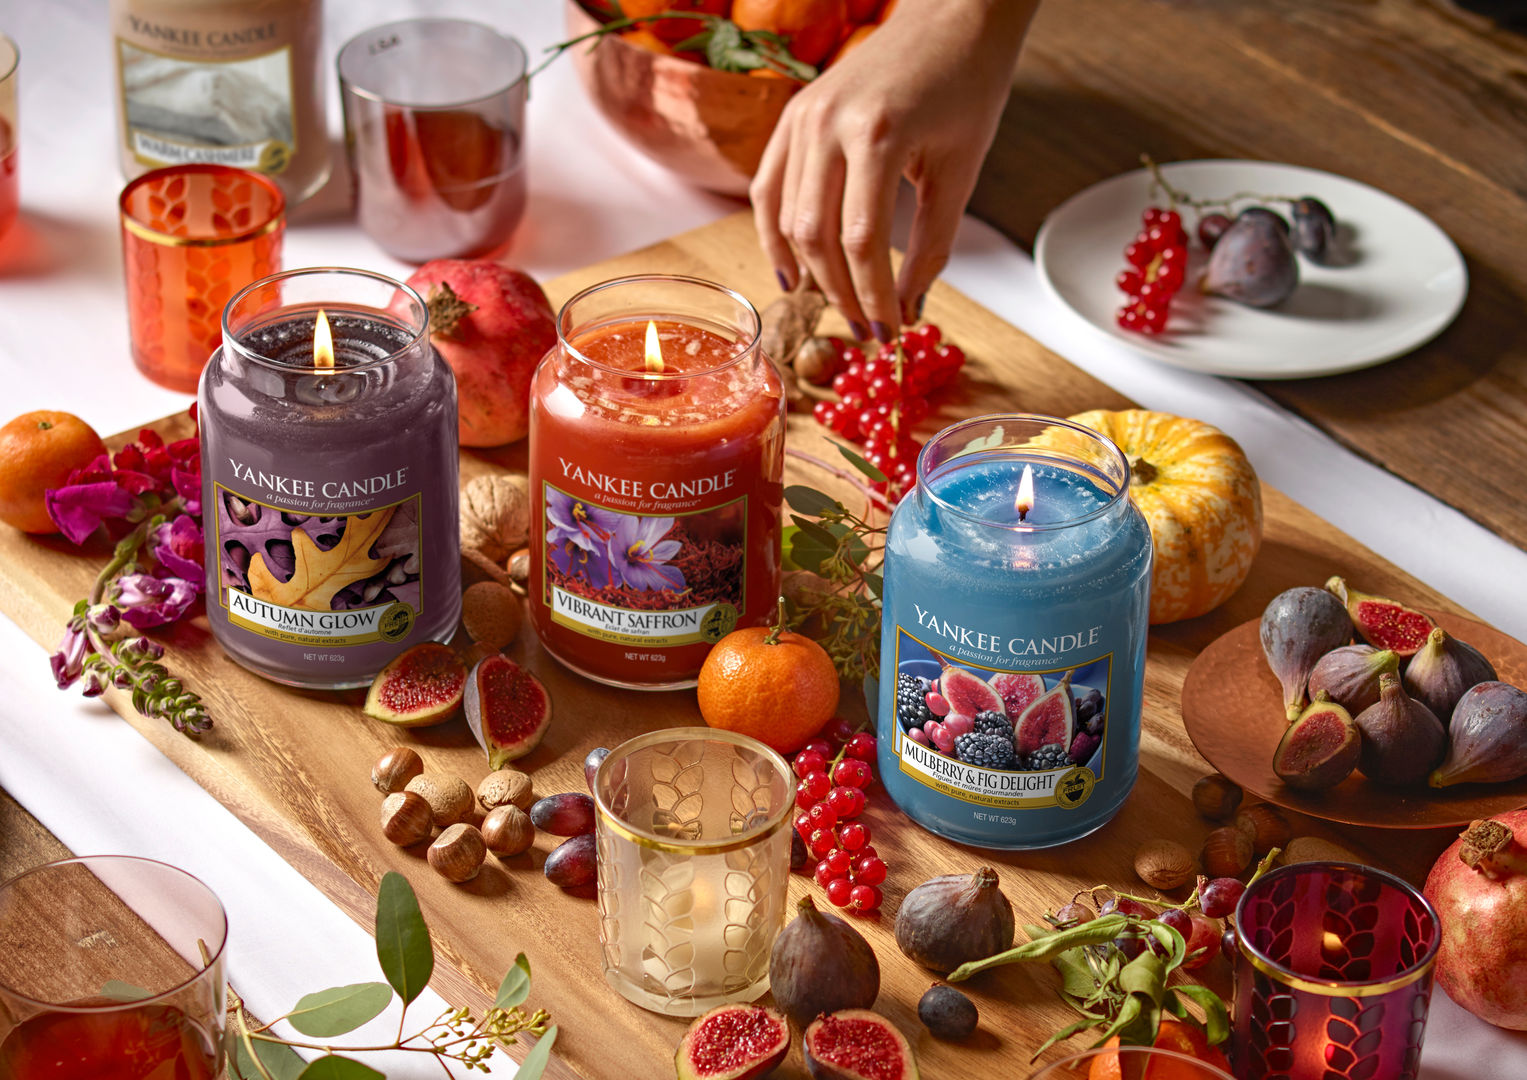 Fall in Love, Spirig Kerzen AG Yankee Candle Switzerland Spirig Kerzen AG Yankee Candle Switzerland Phòng khách Accessories & decoration